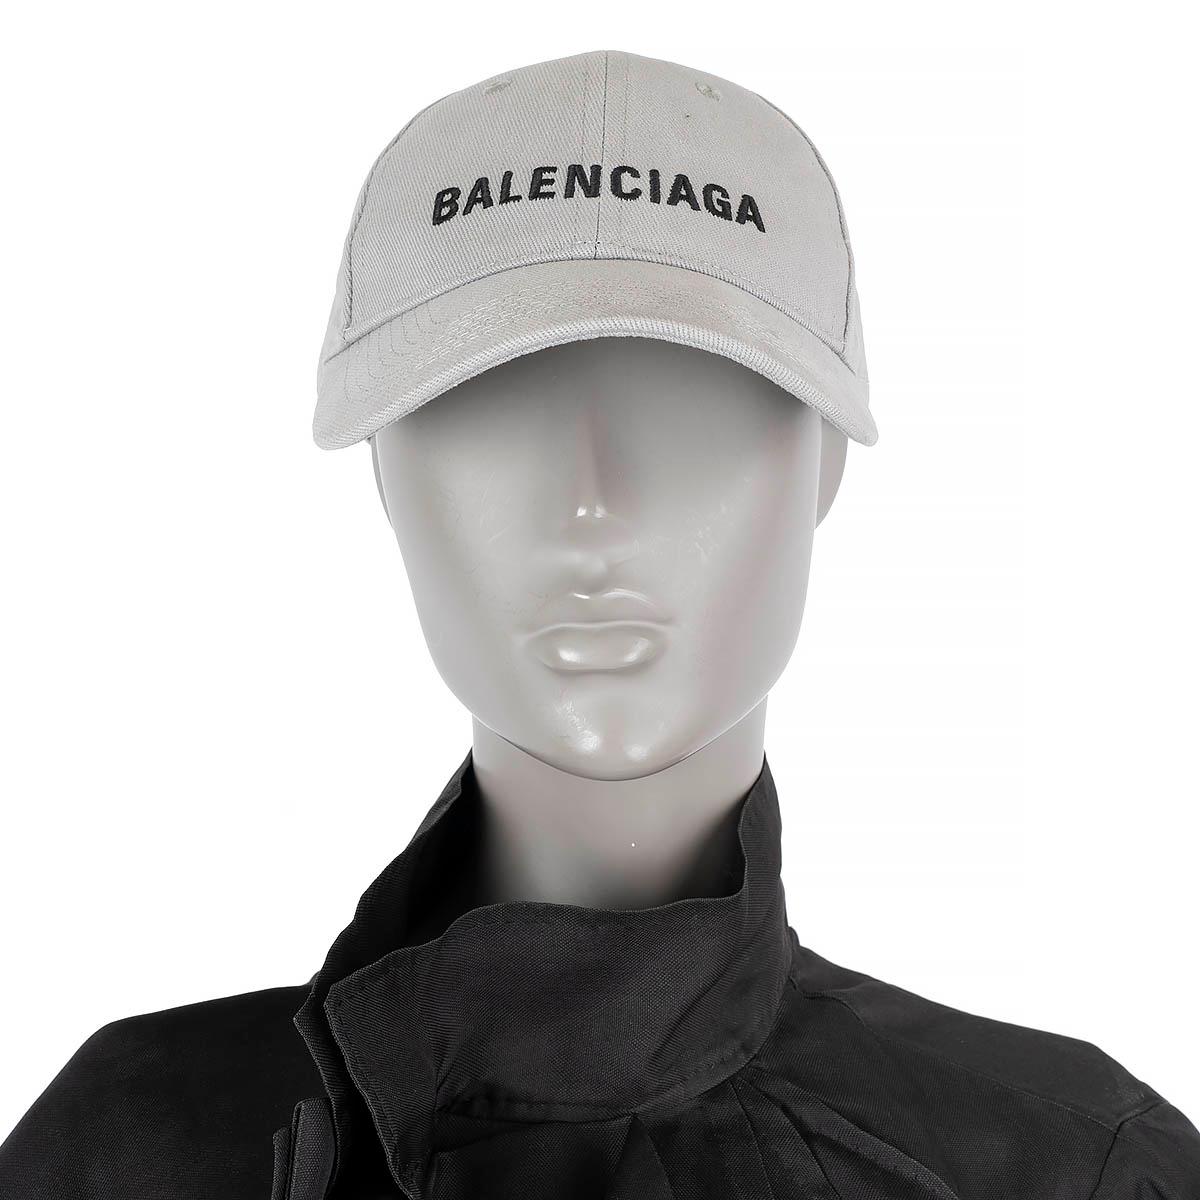 100% authentic Balenciaga logo baseball cap in light grey cotton. Has been worn and is in excellent condition.

Measurements
Tag Size	L/59
Inside Circumference	56cm (21.8in)

All our listings include only the listed item unless otherwise specified